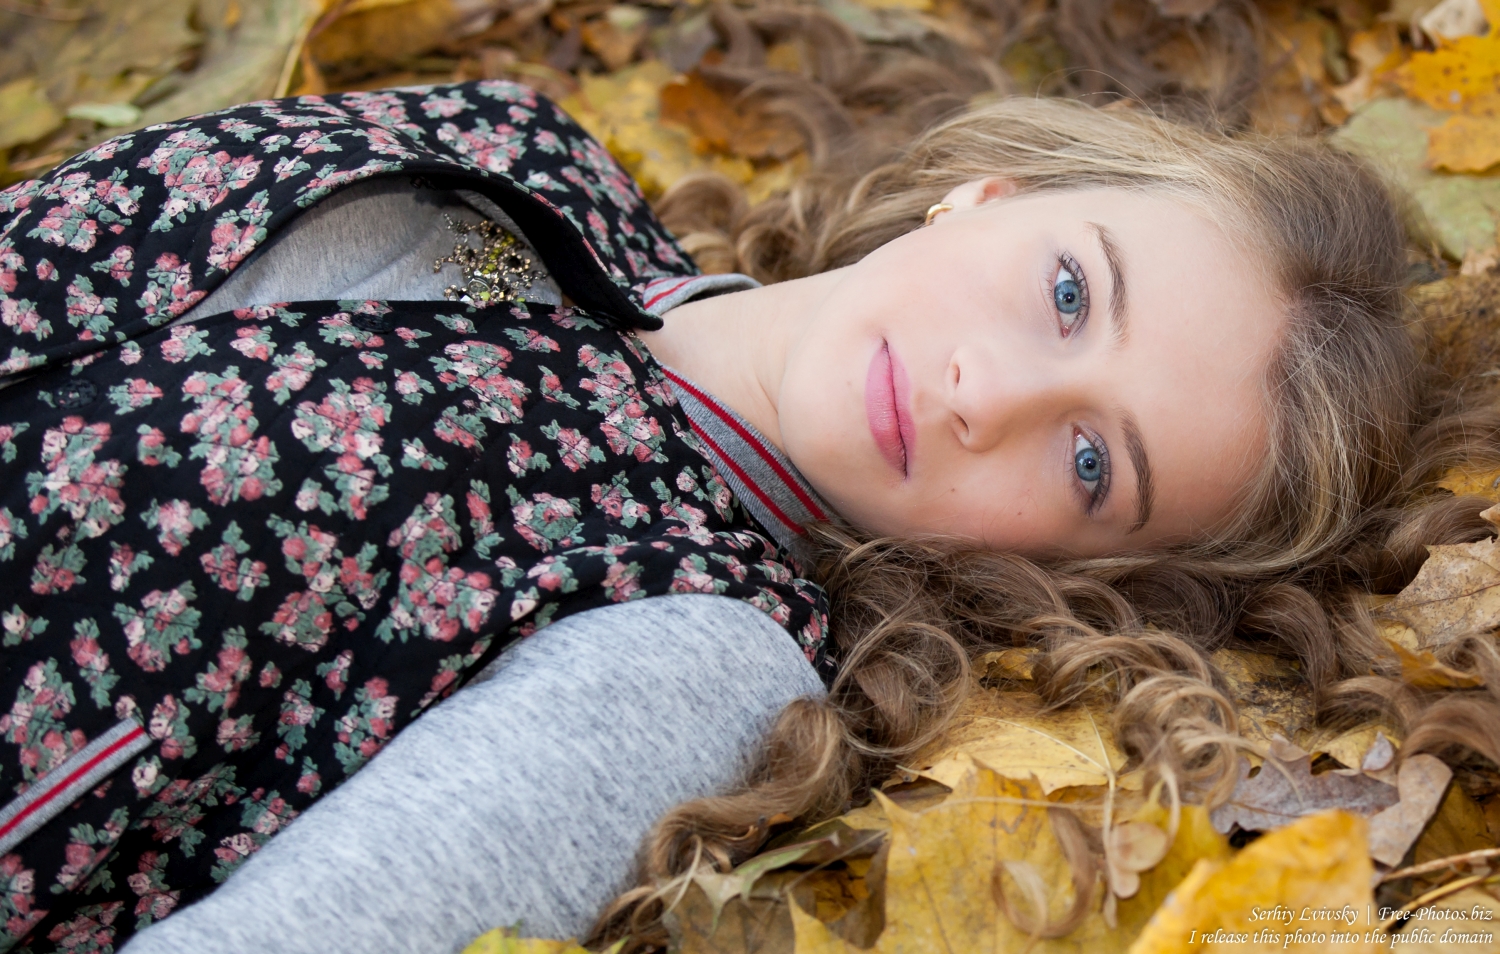 a_13-year-old_girl_photographed_by_serhiy_lvivsky_in_october_2015_05